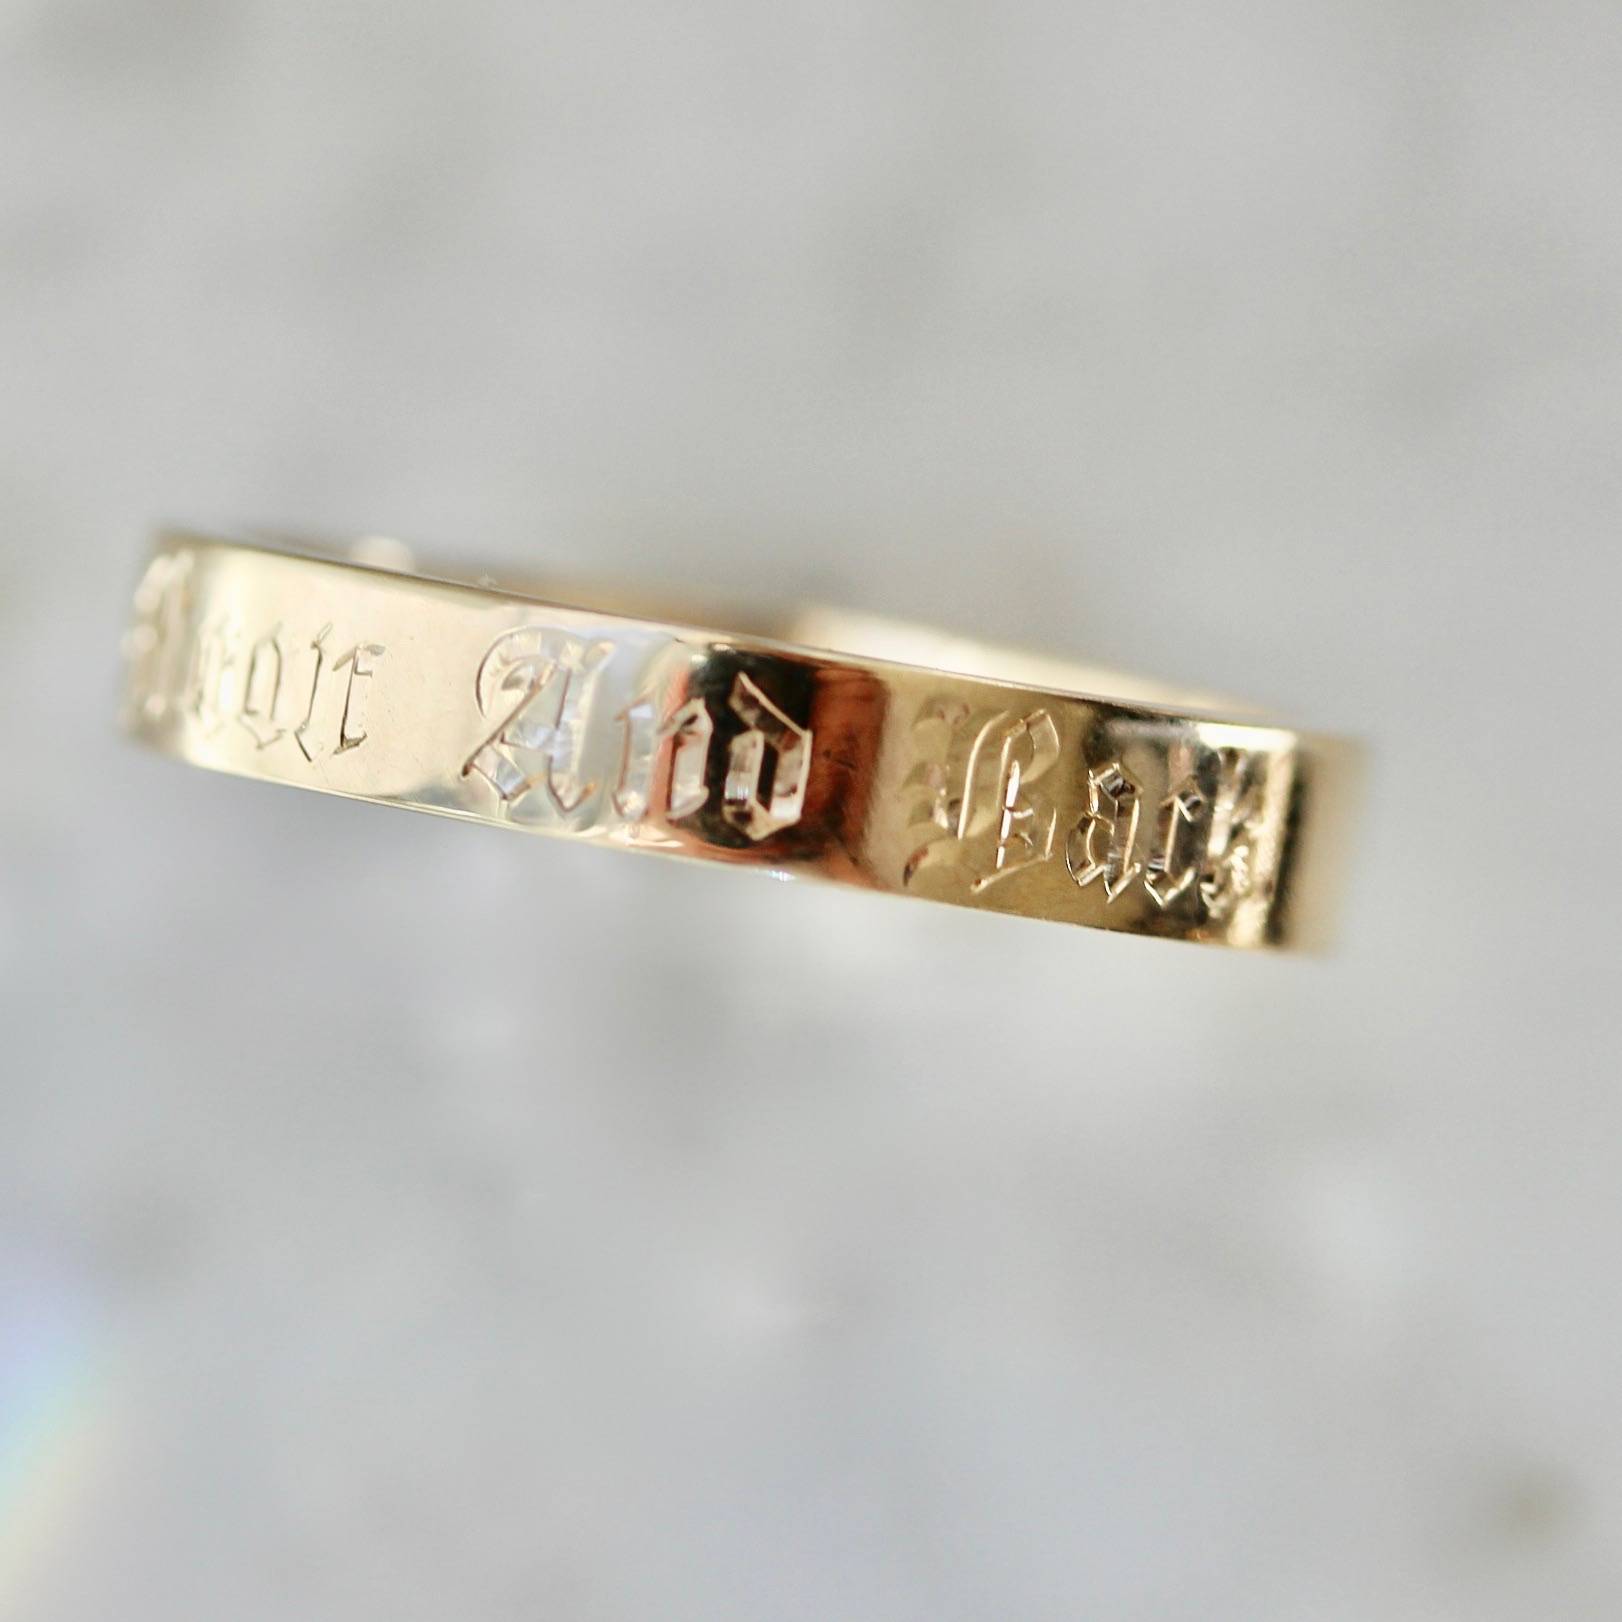 To The Moon and Back Engraved Gold Band